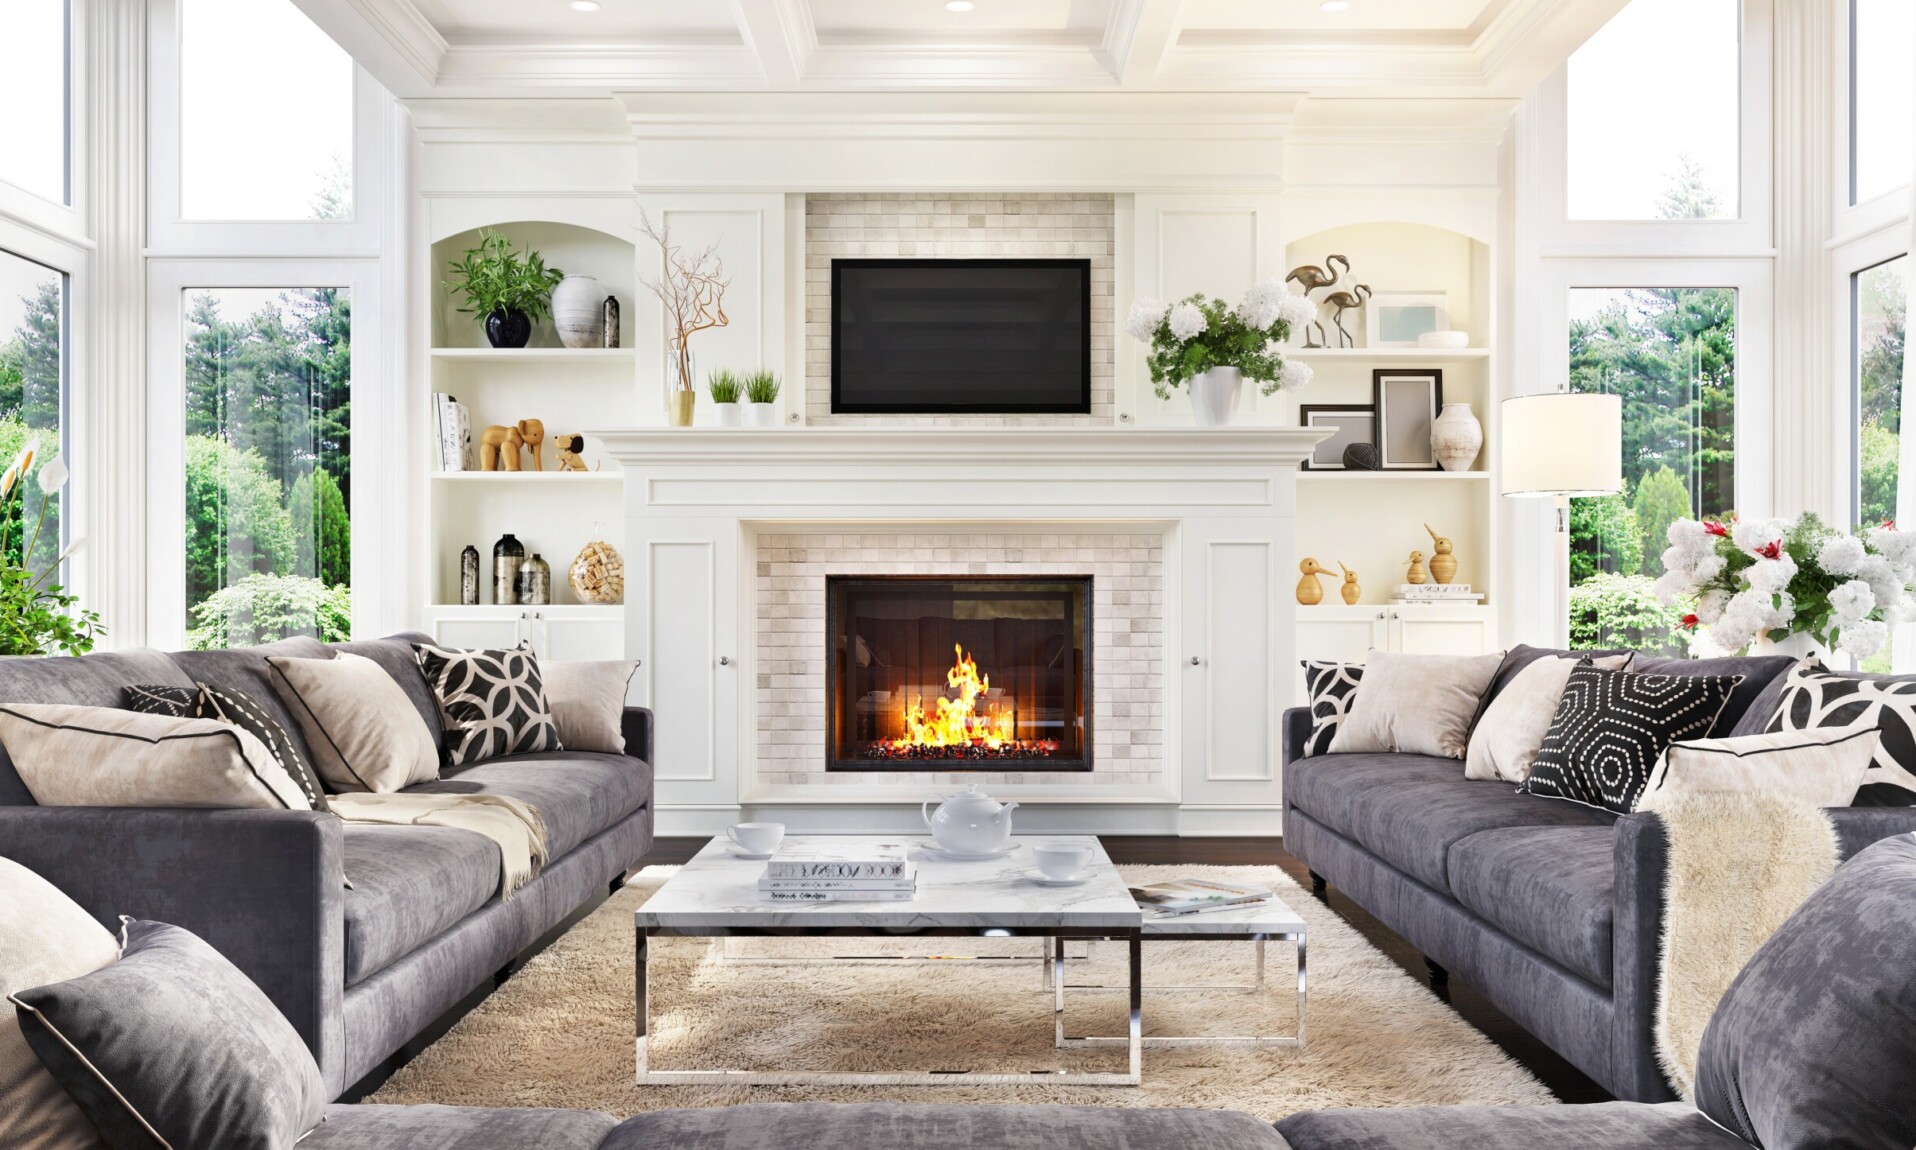 Luxurious Interior Design Living Room And Fireplace In A Beautiful House Scaled 1916x1150 